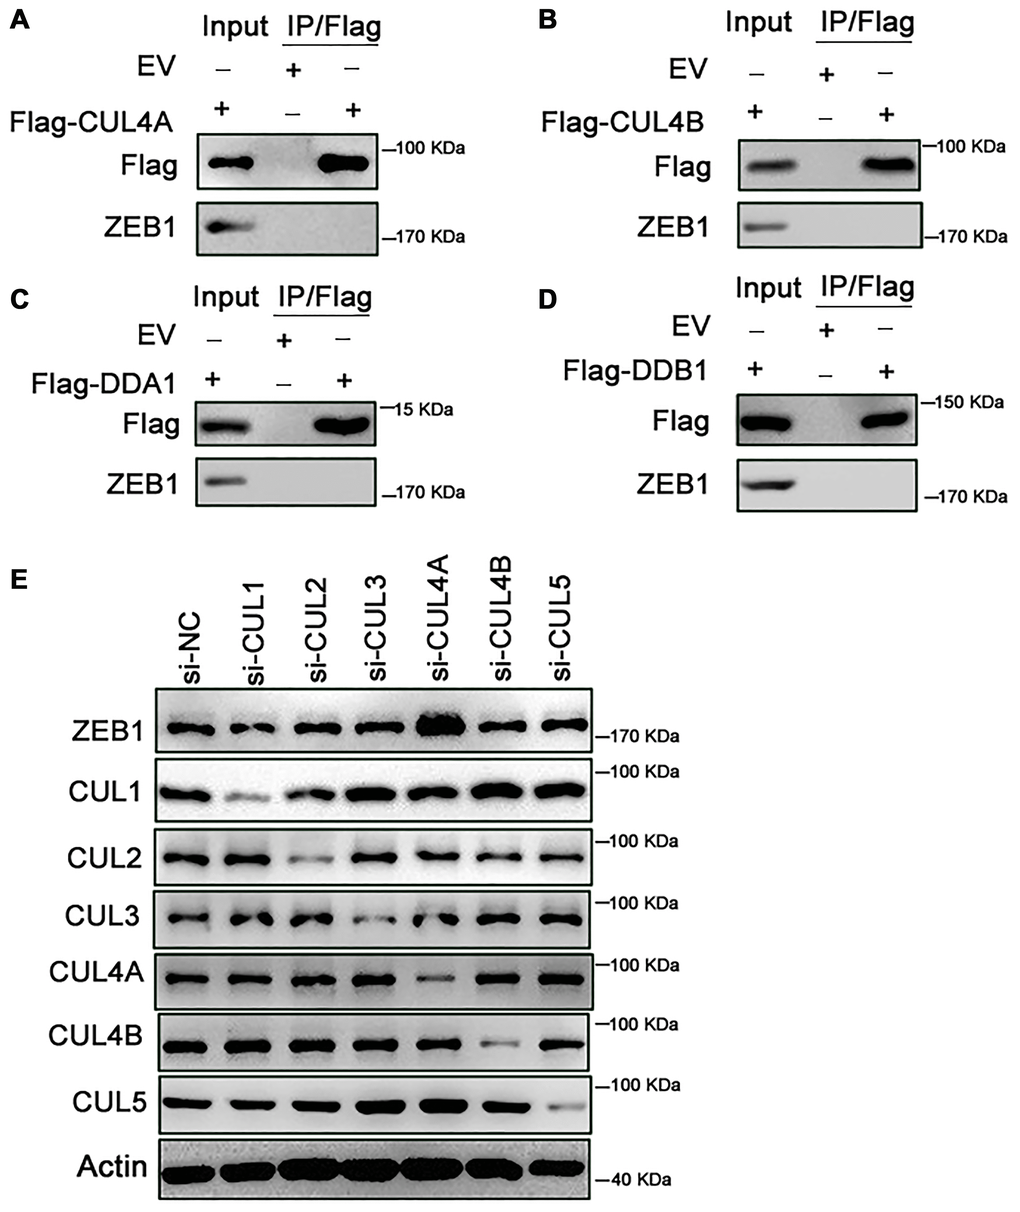 Knockdown of CUL4A promotes the stability of ZEB1. (A–D) HEK293T cells were transfected with Flag-CUL4A, Flag-CUL4B, Flag-DDA1 and Flag-DDB1 respectively. After 24h, cells were treated with 10 μM MG132 for 6h. Cell lysates were immunoprecipitated using FLAG-M2 agarose beads and analyzed by immunoblotting with the indicated antibodies. (A) Ectopically expressed CUL4A didn’t bind with endogenous ZEB1. (B) Ectopically expressed CUL4B didn’t bind with endogenous ZEB1. (C) Ectopically expressed DDA1 didn’t bind with endogenous ZEB1. (D) Ectopically expressed DDB1 didn’t bind with endogenous ZEB1. (E) SMMC-7721 cells were transfected with the control or si-CUL1, si-CUL2, si-CUL3, si-CUL4B and si-CUL5 respectively. Cell lysates were analyzed by immunoblotting with the indicated antibodies. Expression of si-CUL1, si-CUL2, si-CUL3, si-CUL4B and si-CUL5 had no effect on ZEB1 degradation, in contrast, si-CUL4A promoted the ZEB1 protein expression.